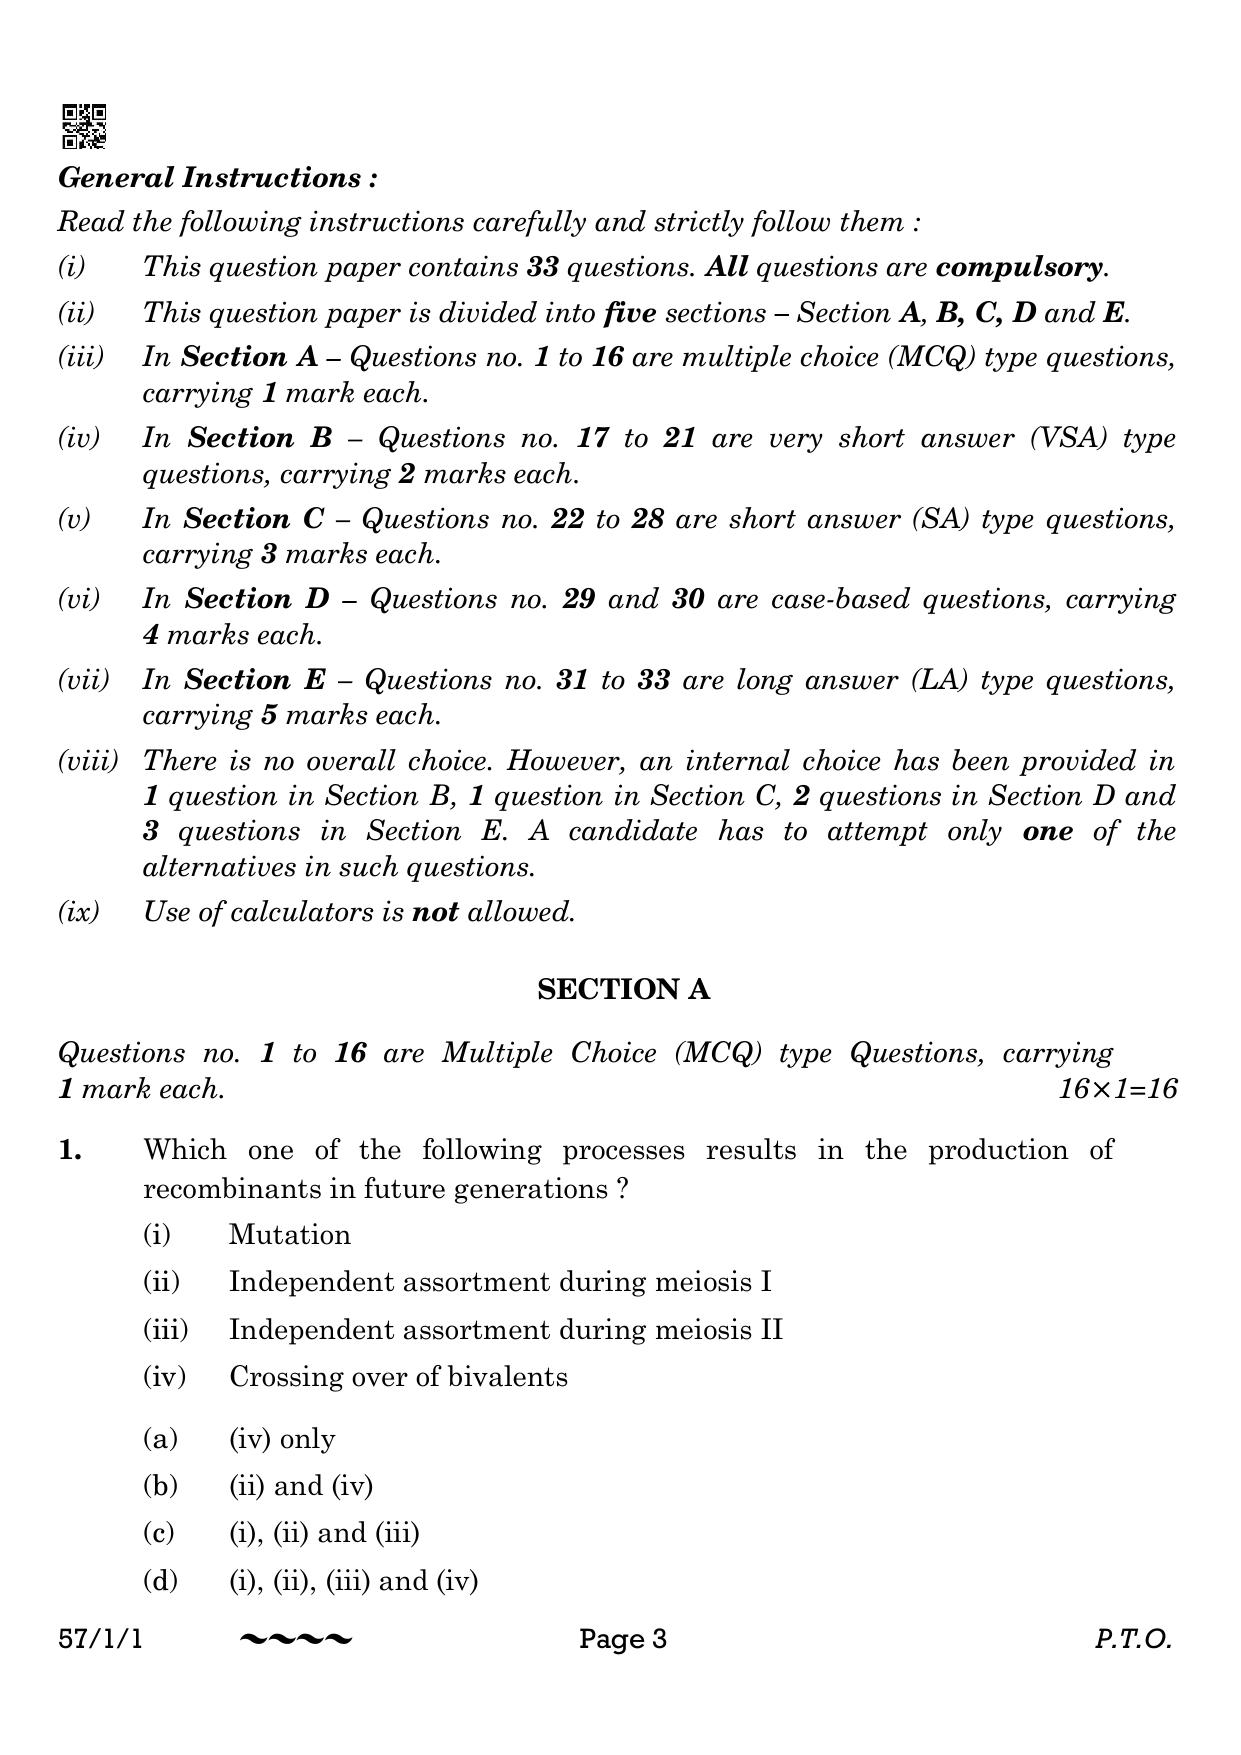 CBSE Class 12 57-1-1 Biology 2023 Question Paper - Page 3